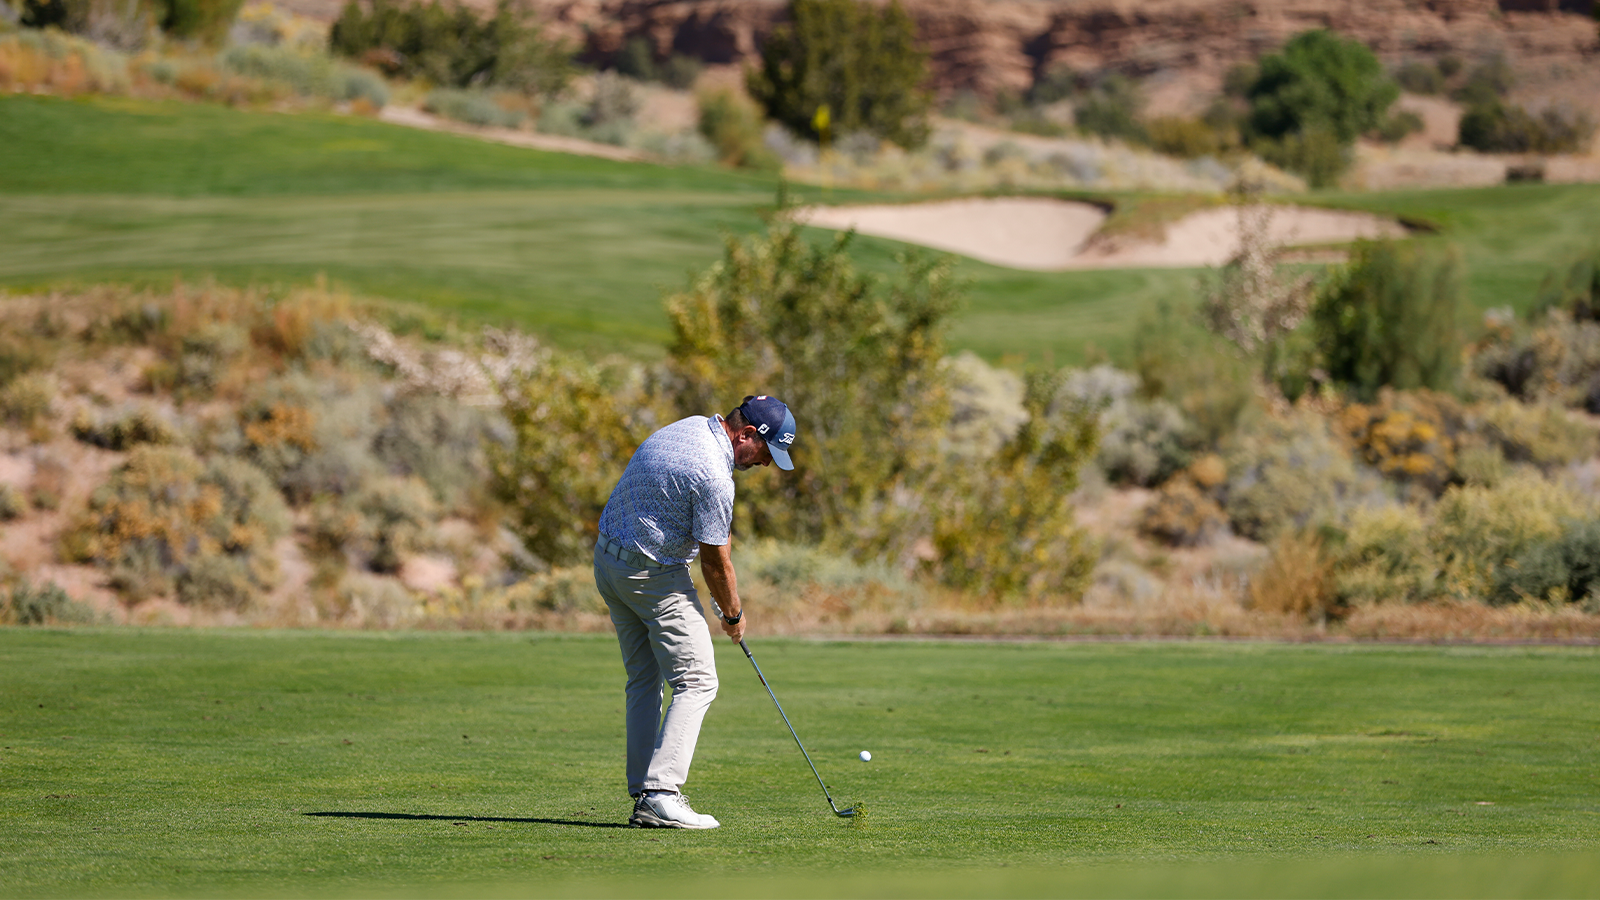 Alan Sorensen hits his shot on the 10th hole during the second round of the 34th Senior PGA Professional Championship at Twin Warriors Golf Club on October 14, 2022 in Santa Ana Pueblo, New Mexico. (Photo by Justin Edmonds/PGA of America)